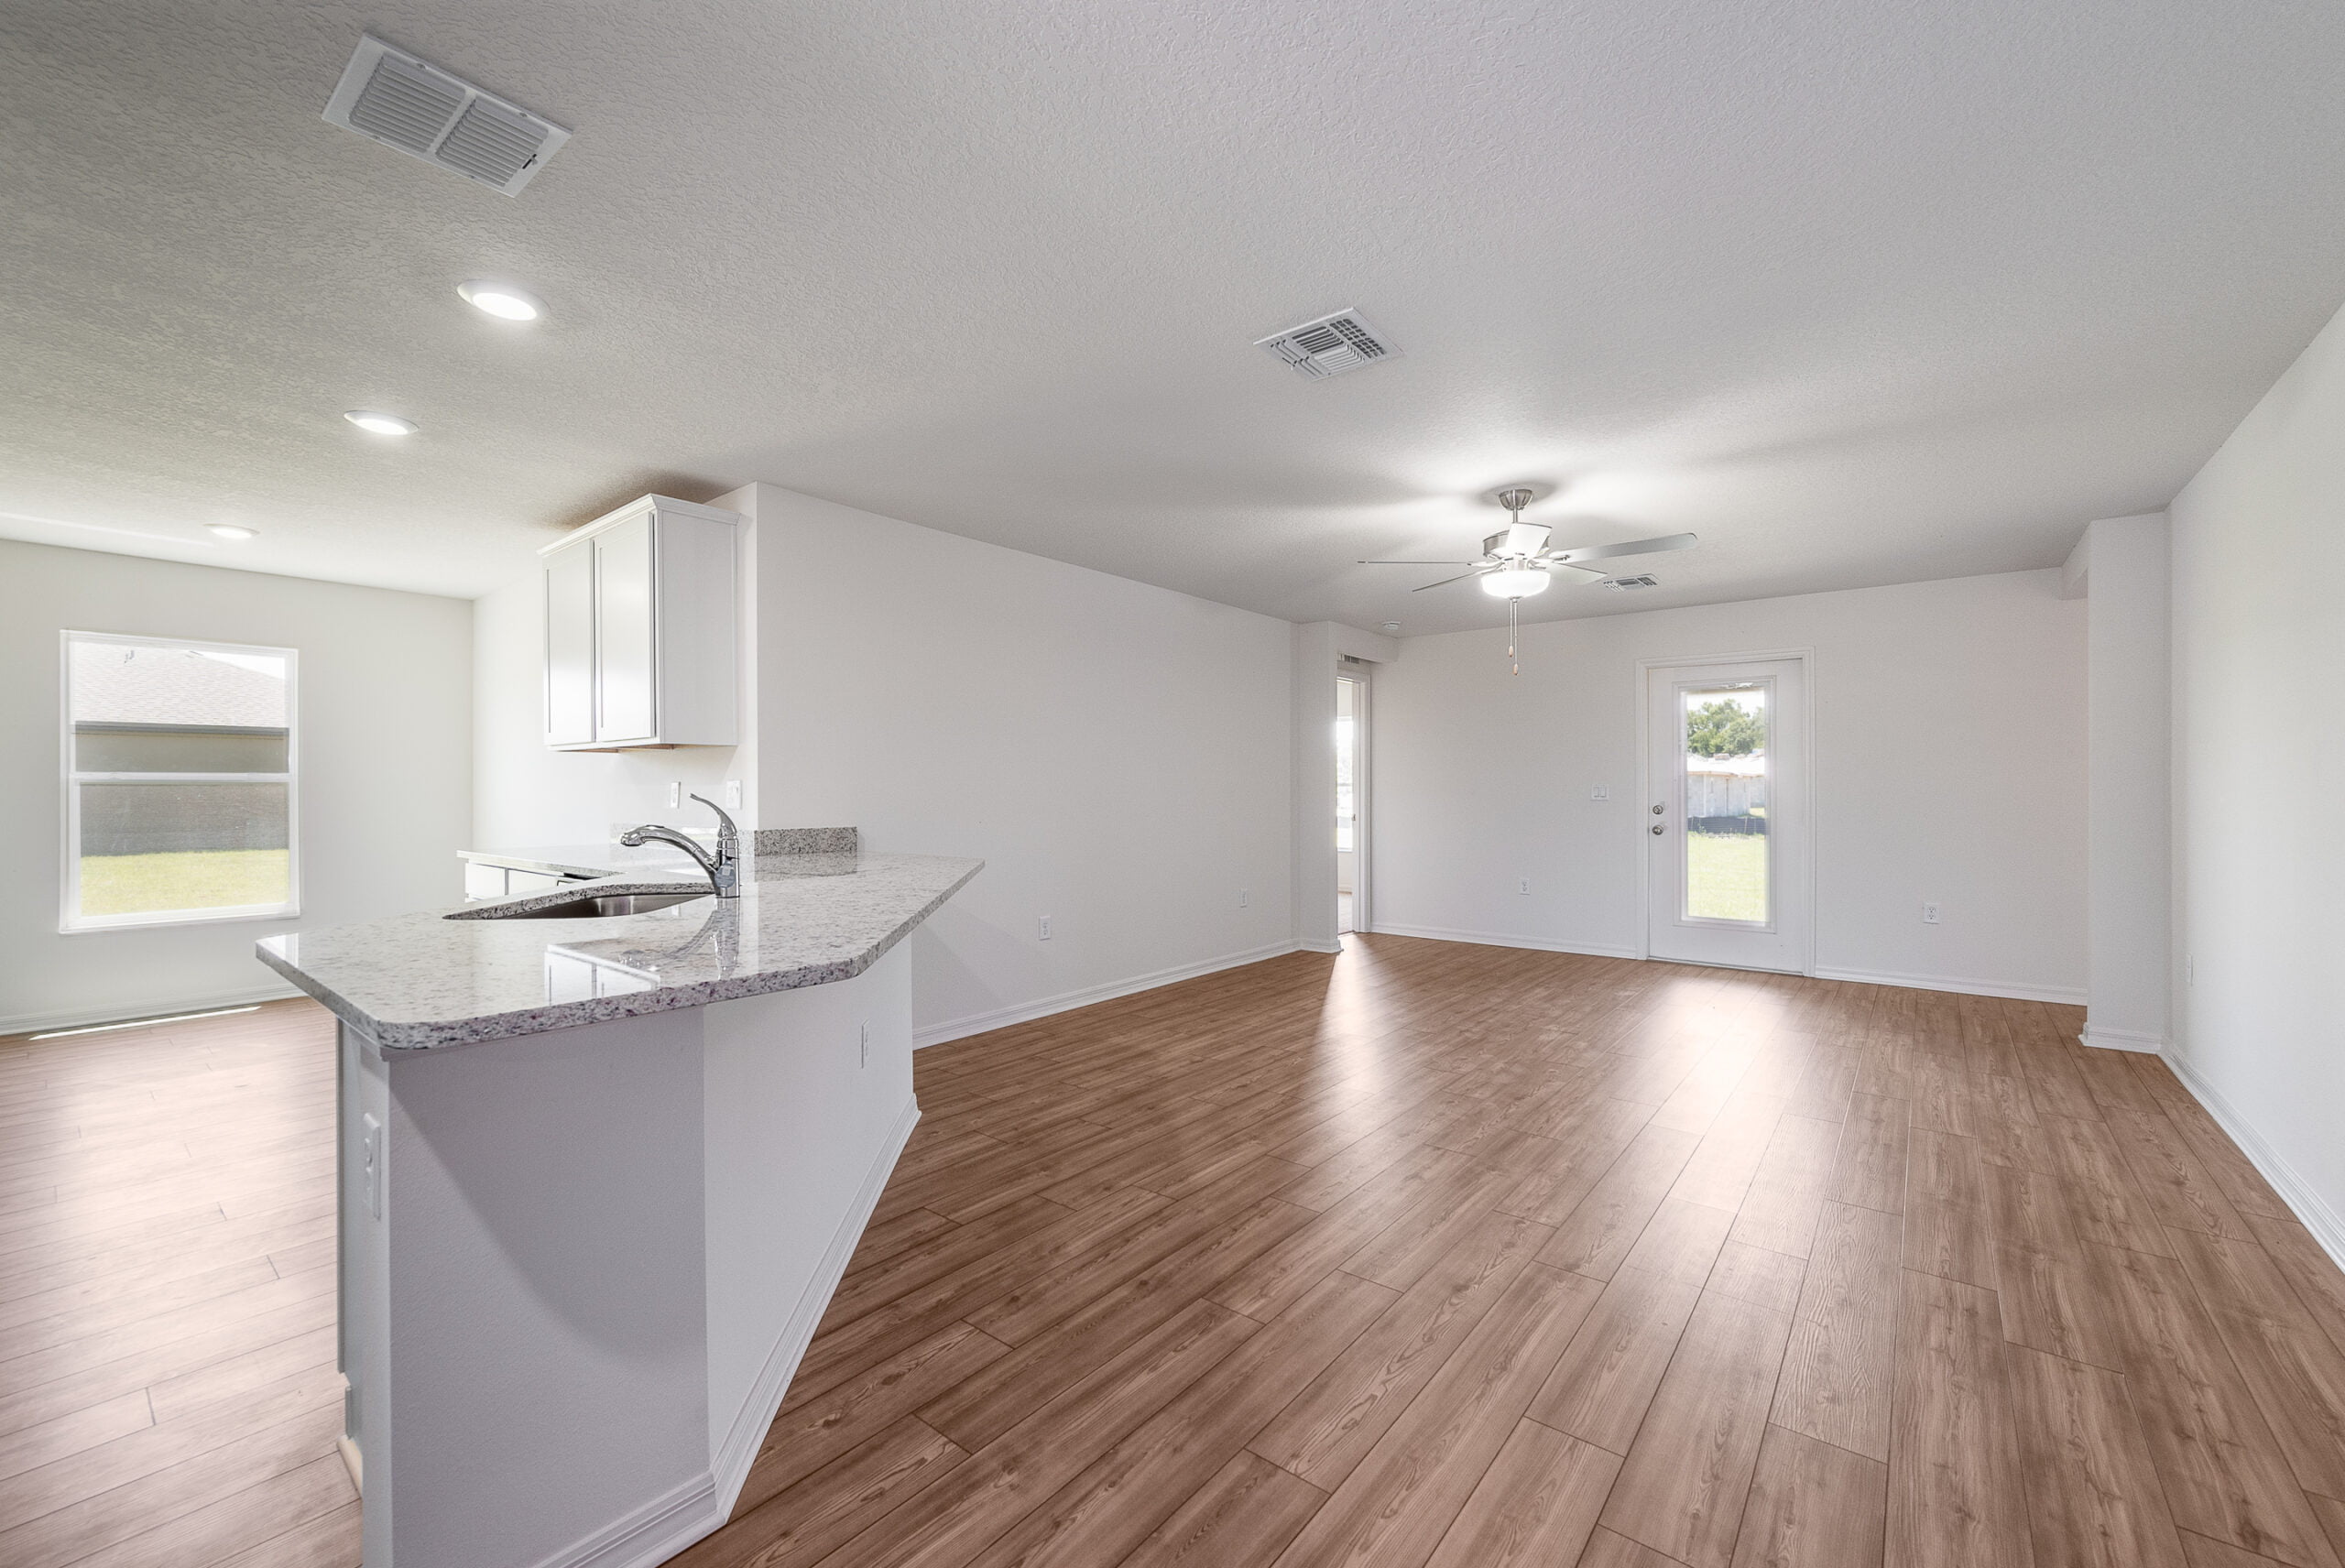 This photo displays an empty, bright room featuring a kitchen area with modern appliances and a breakfast bar. The space has laminate wood flooring, recessed lighting, and a ceiling fan, with natural light entering through windows and a glass door leading to a backyard.